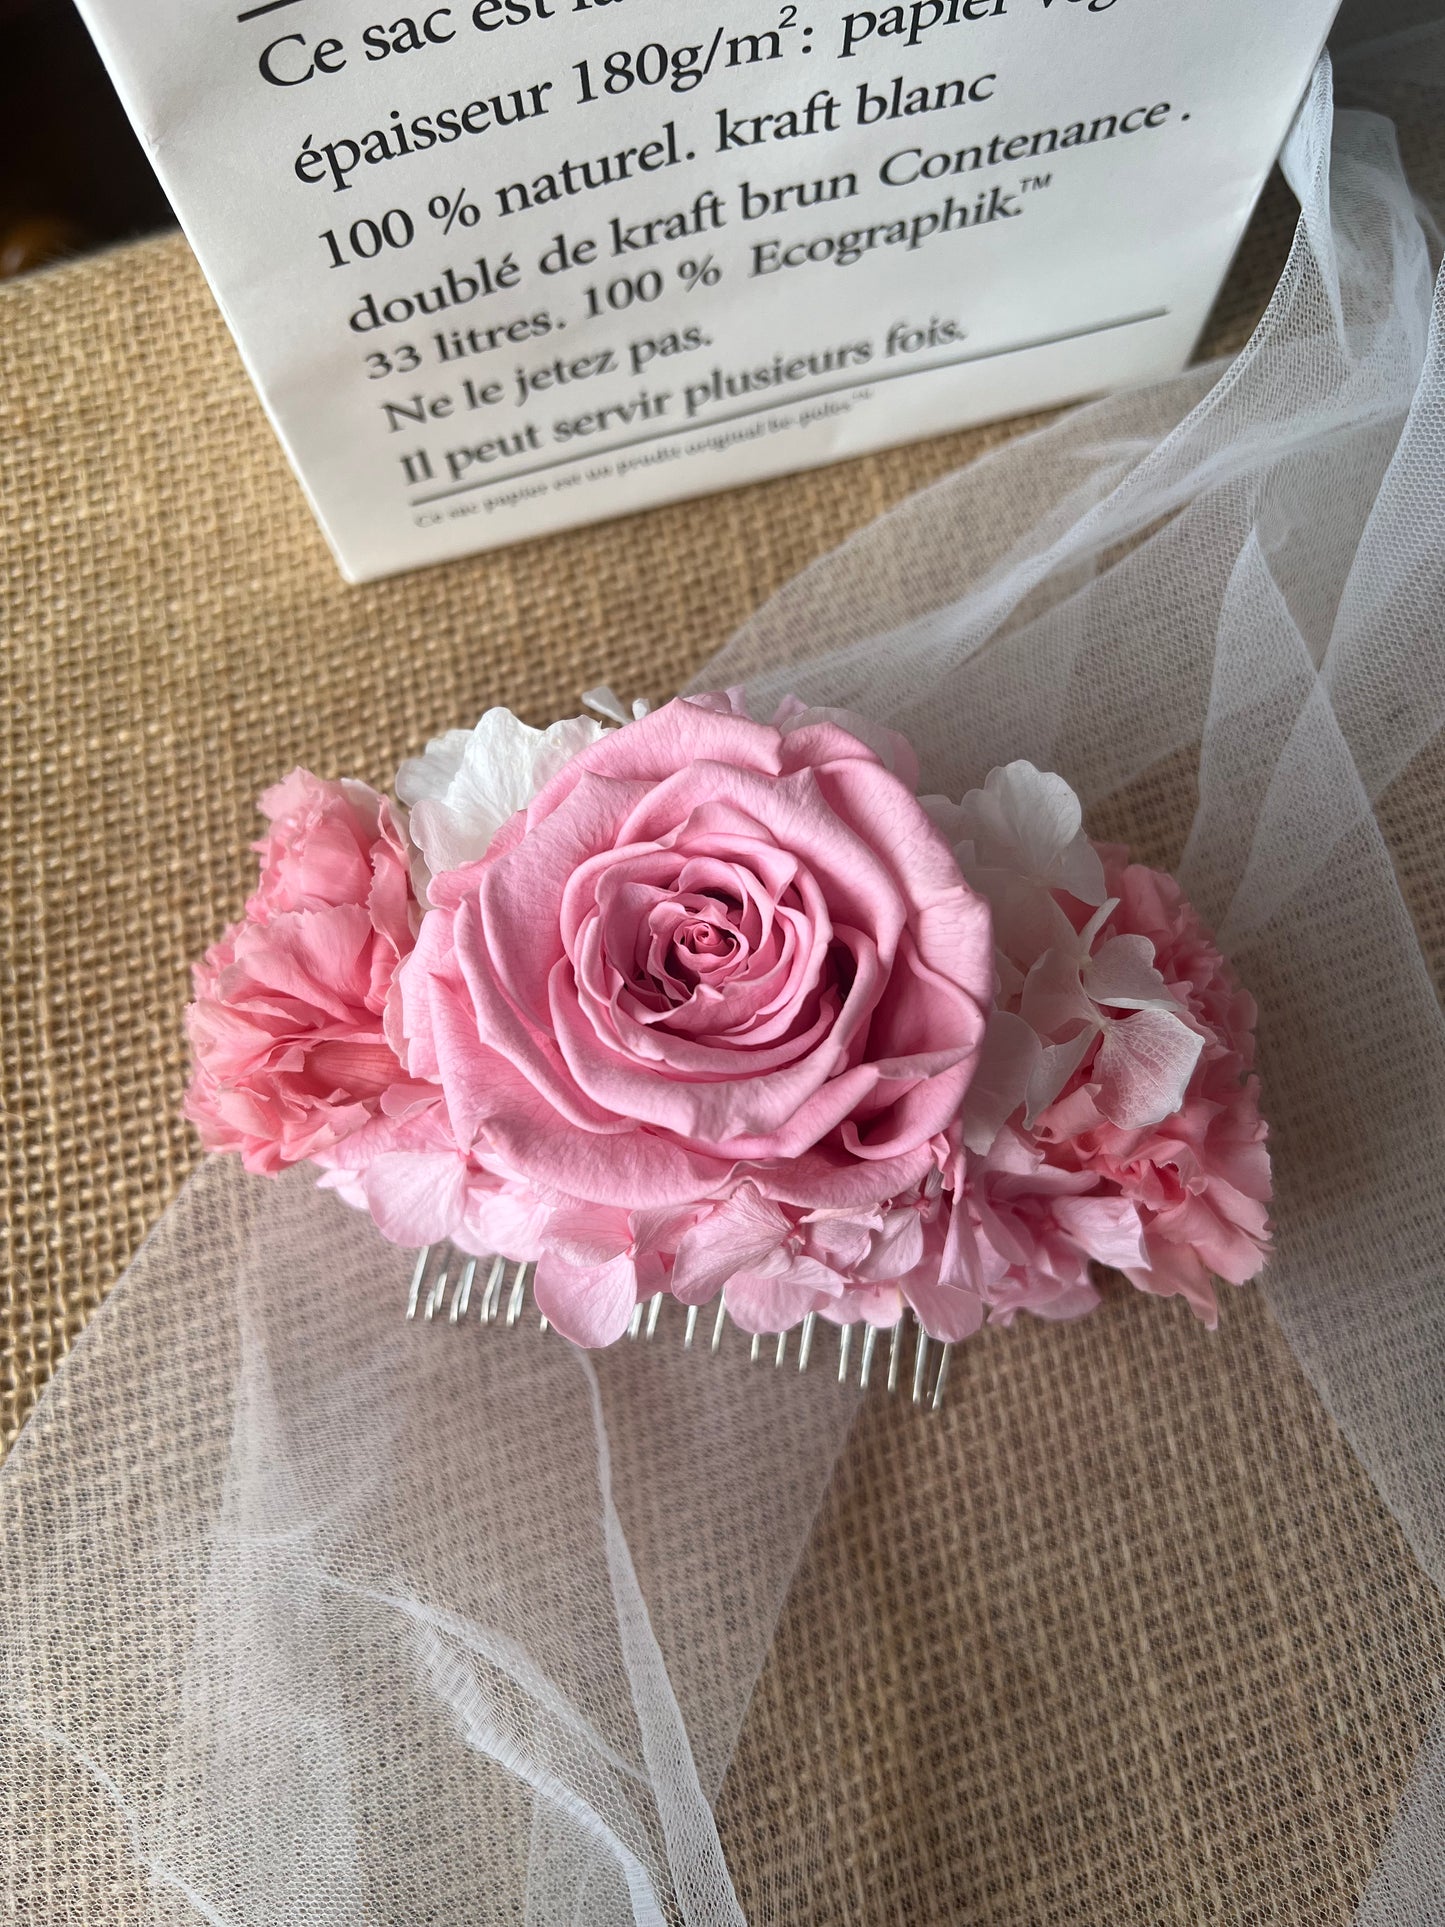 Barbie Inspired Pink Rose Wedding Flower Hair Piece, Bright Pink Floral Hair Accessories for Brides, Bridal Hair Piece Big Dried Flower Comb